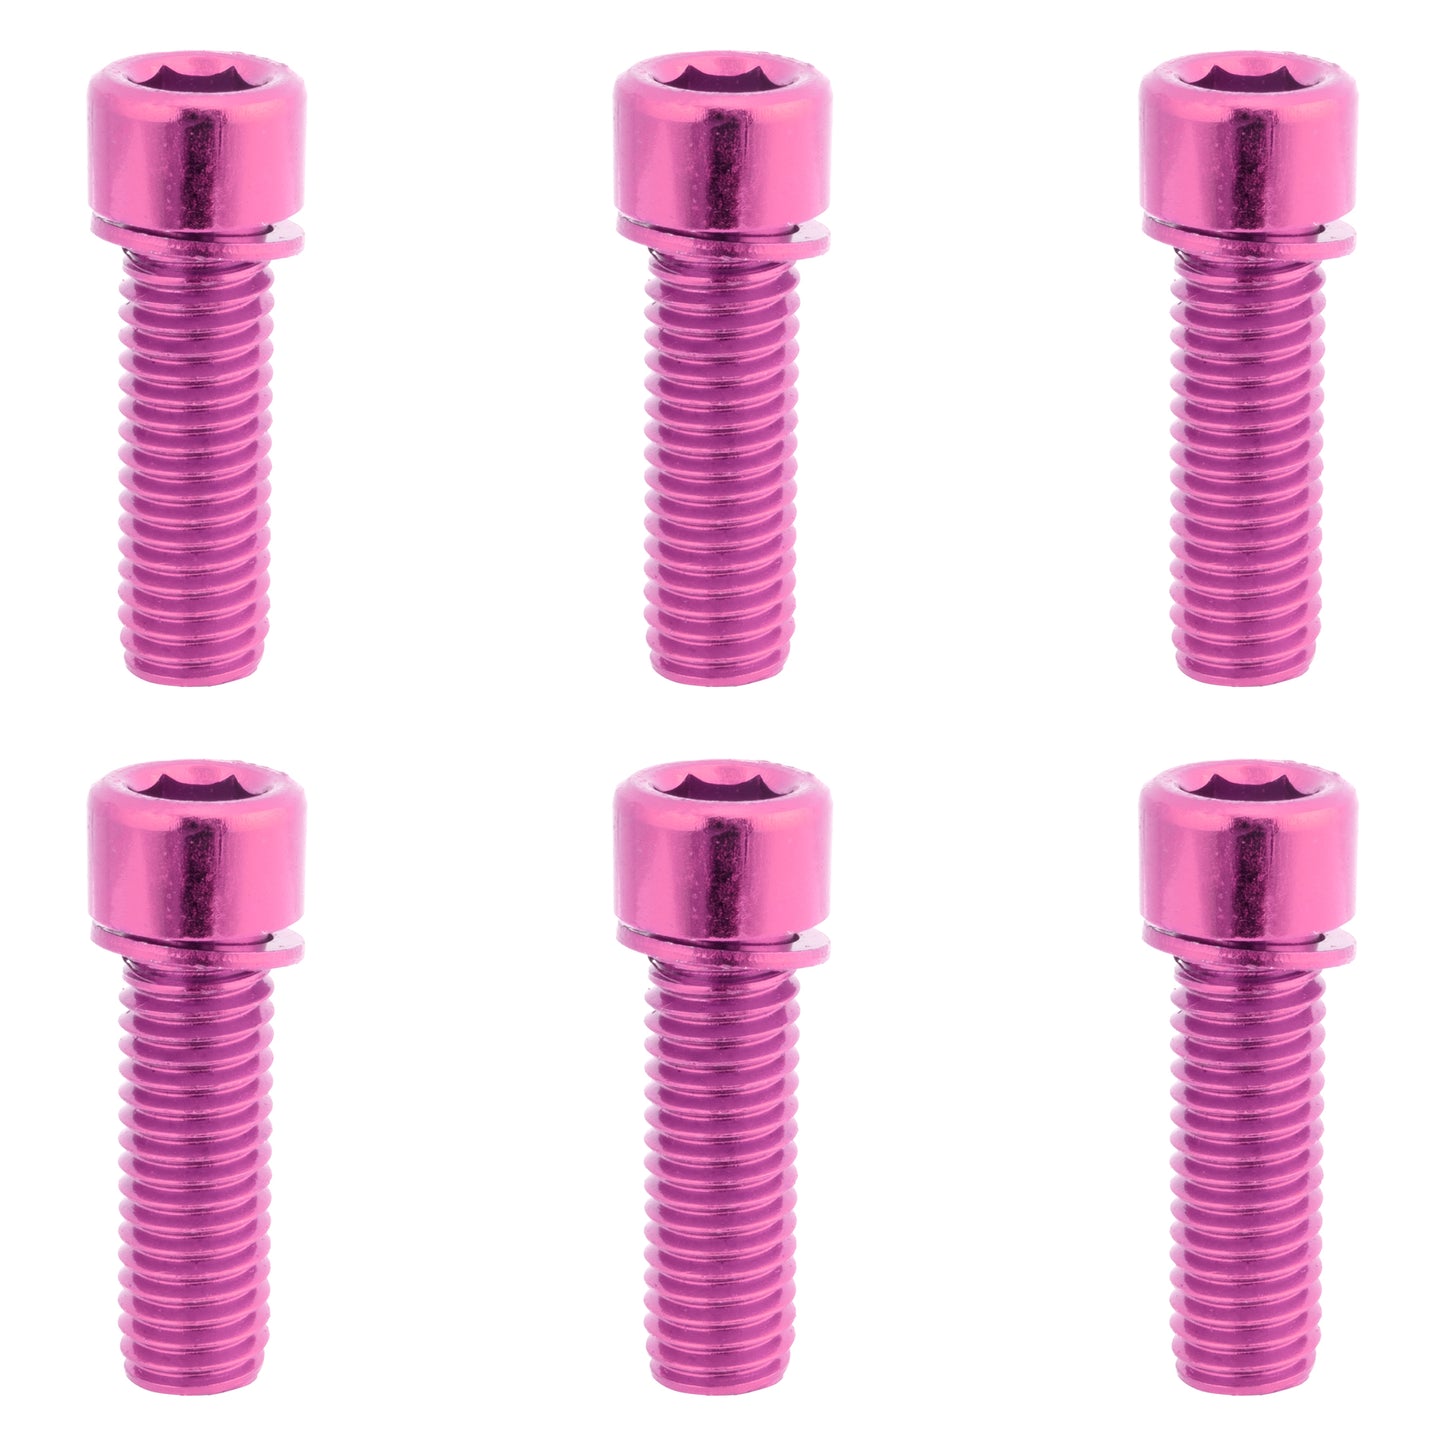 Shadow Hollow Bolts Kit (Pack of 6)